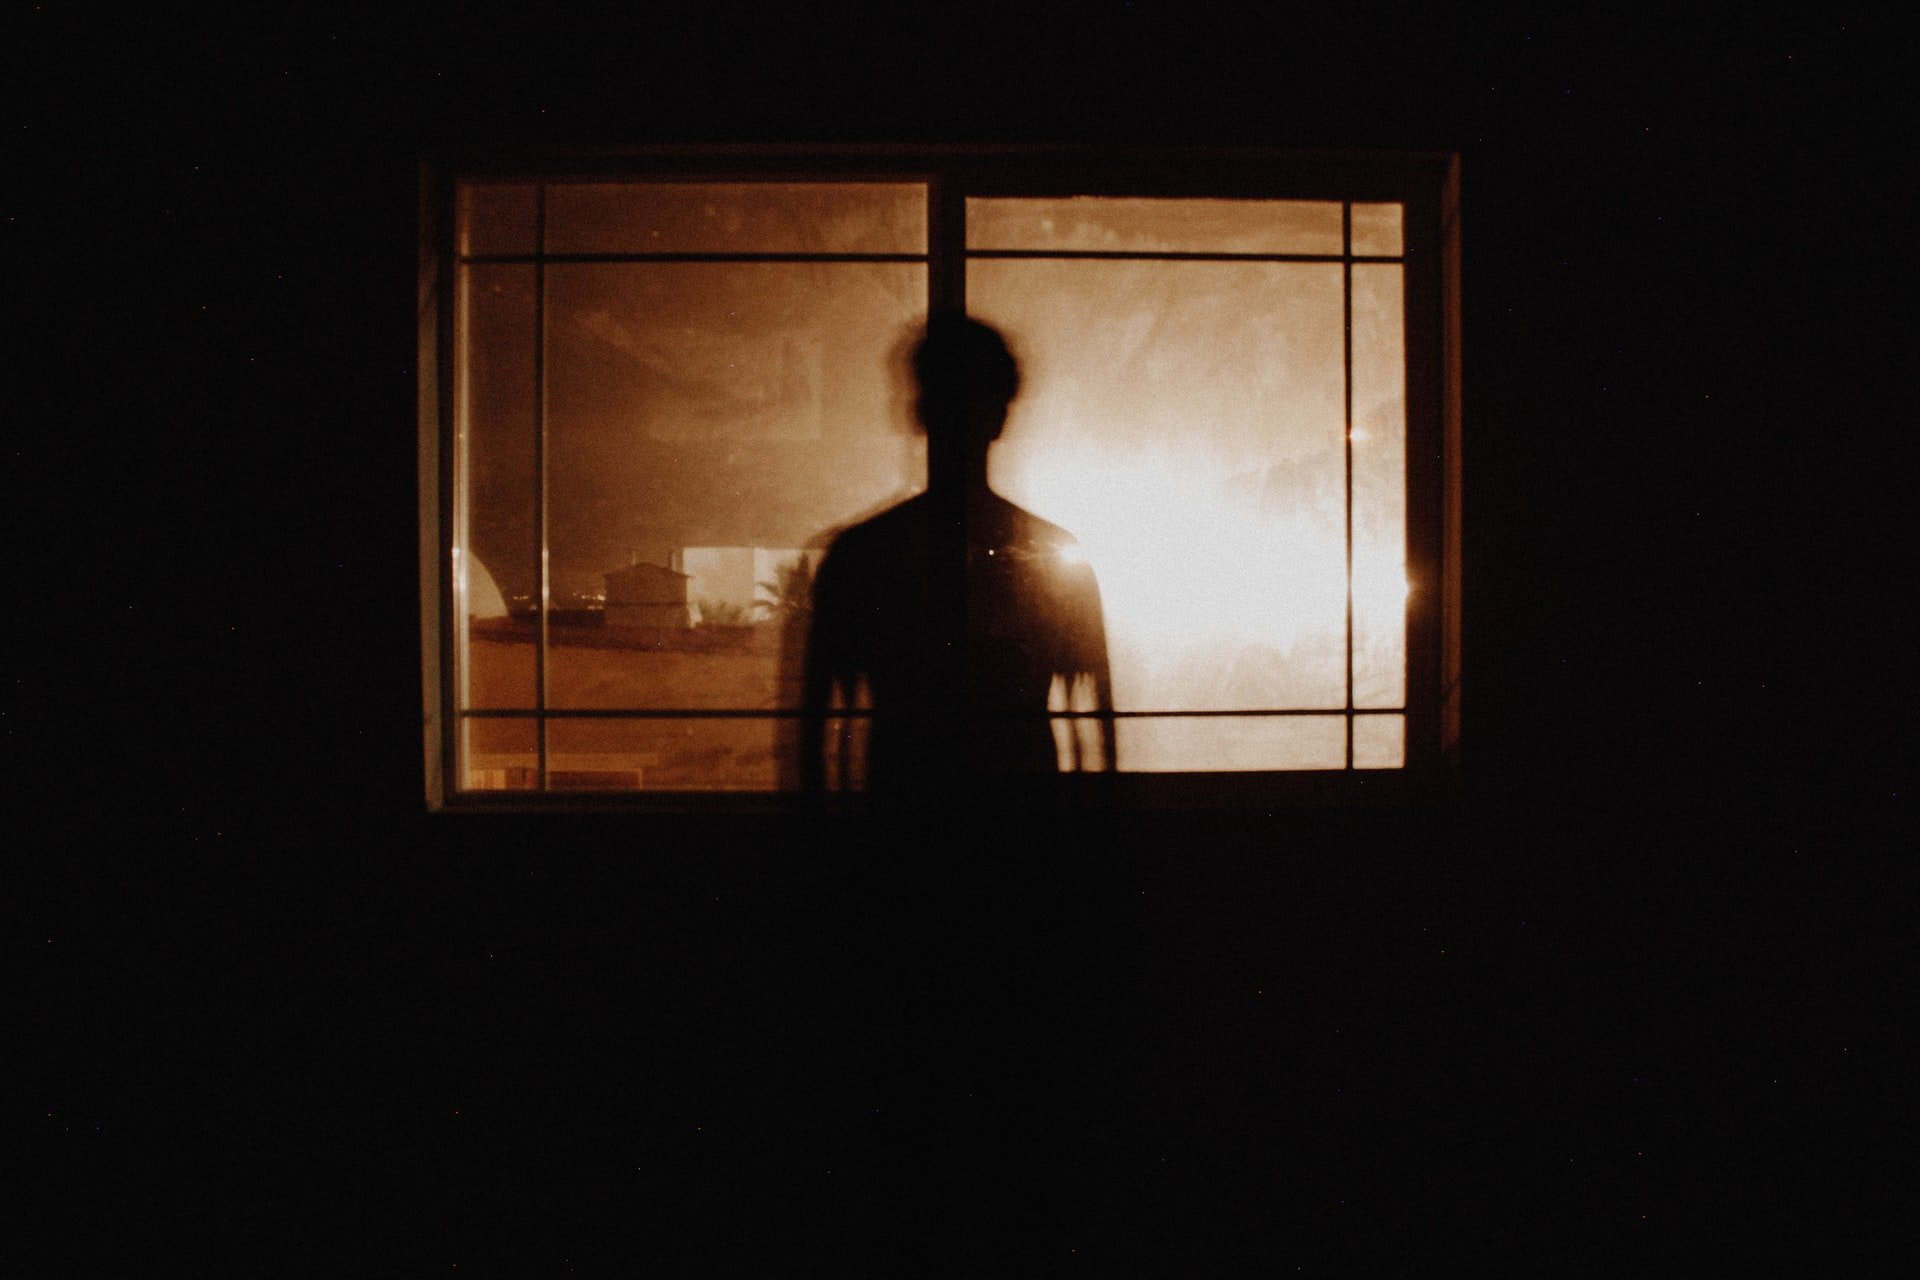 They saw a dark figure in the room. | Source: Unsplash